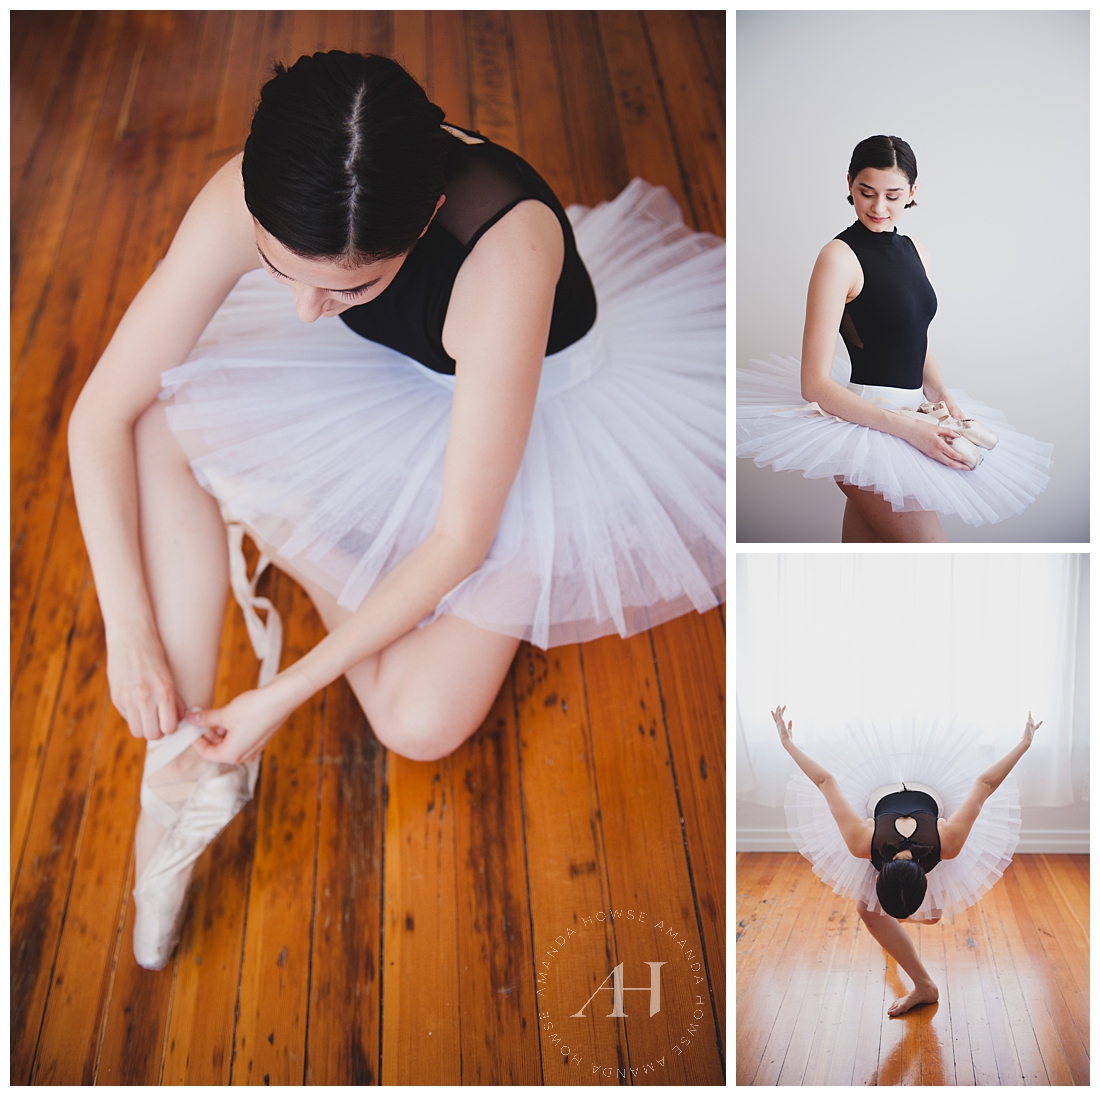 Gorgeous Ballerina Putting on Ballet Slippers and Dancing | Ballerina Portrait Sessions in Tacoma | Amanda Howse Photography